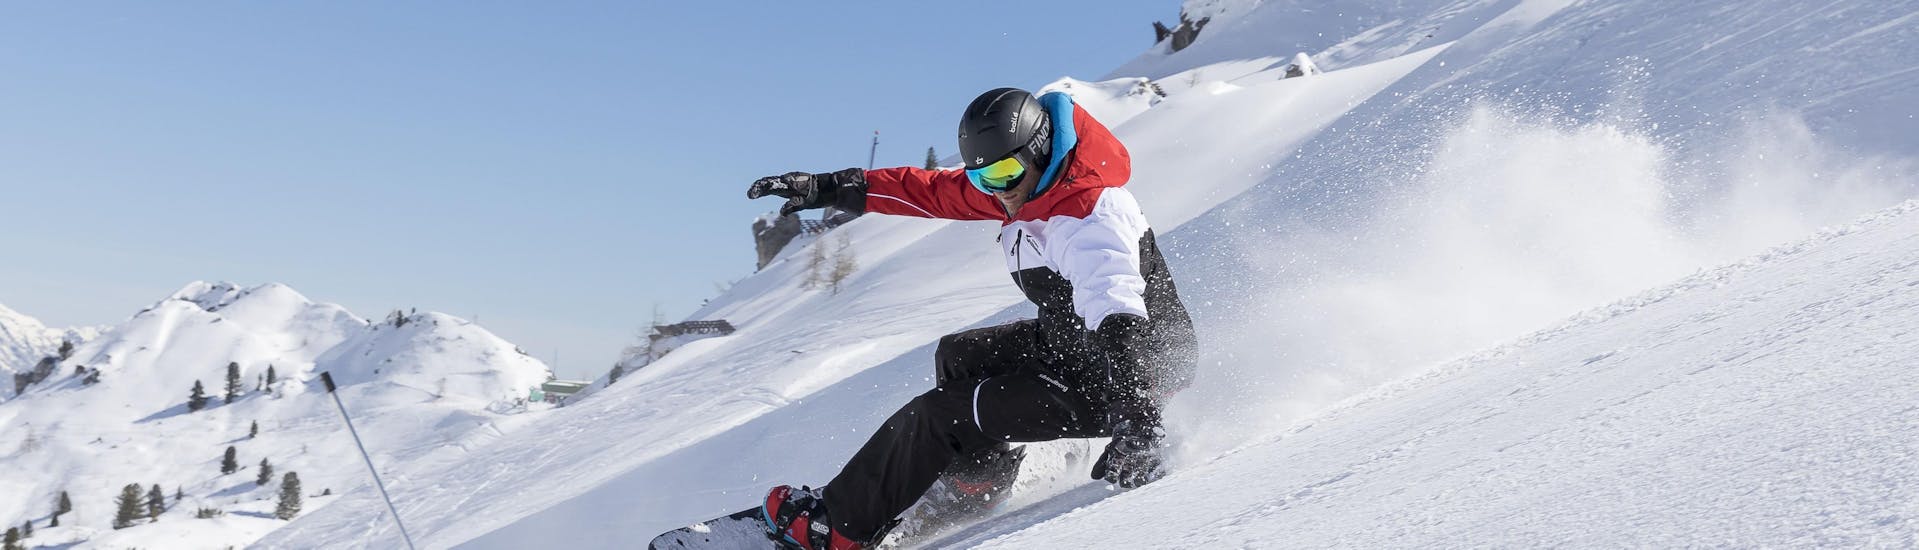 A snowboarder is shredding down a slope during his snowboarding lessons for advanced boarders in Stubai.